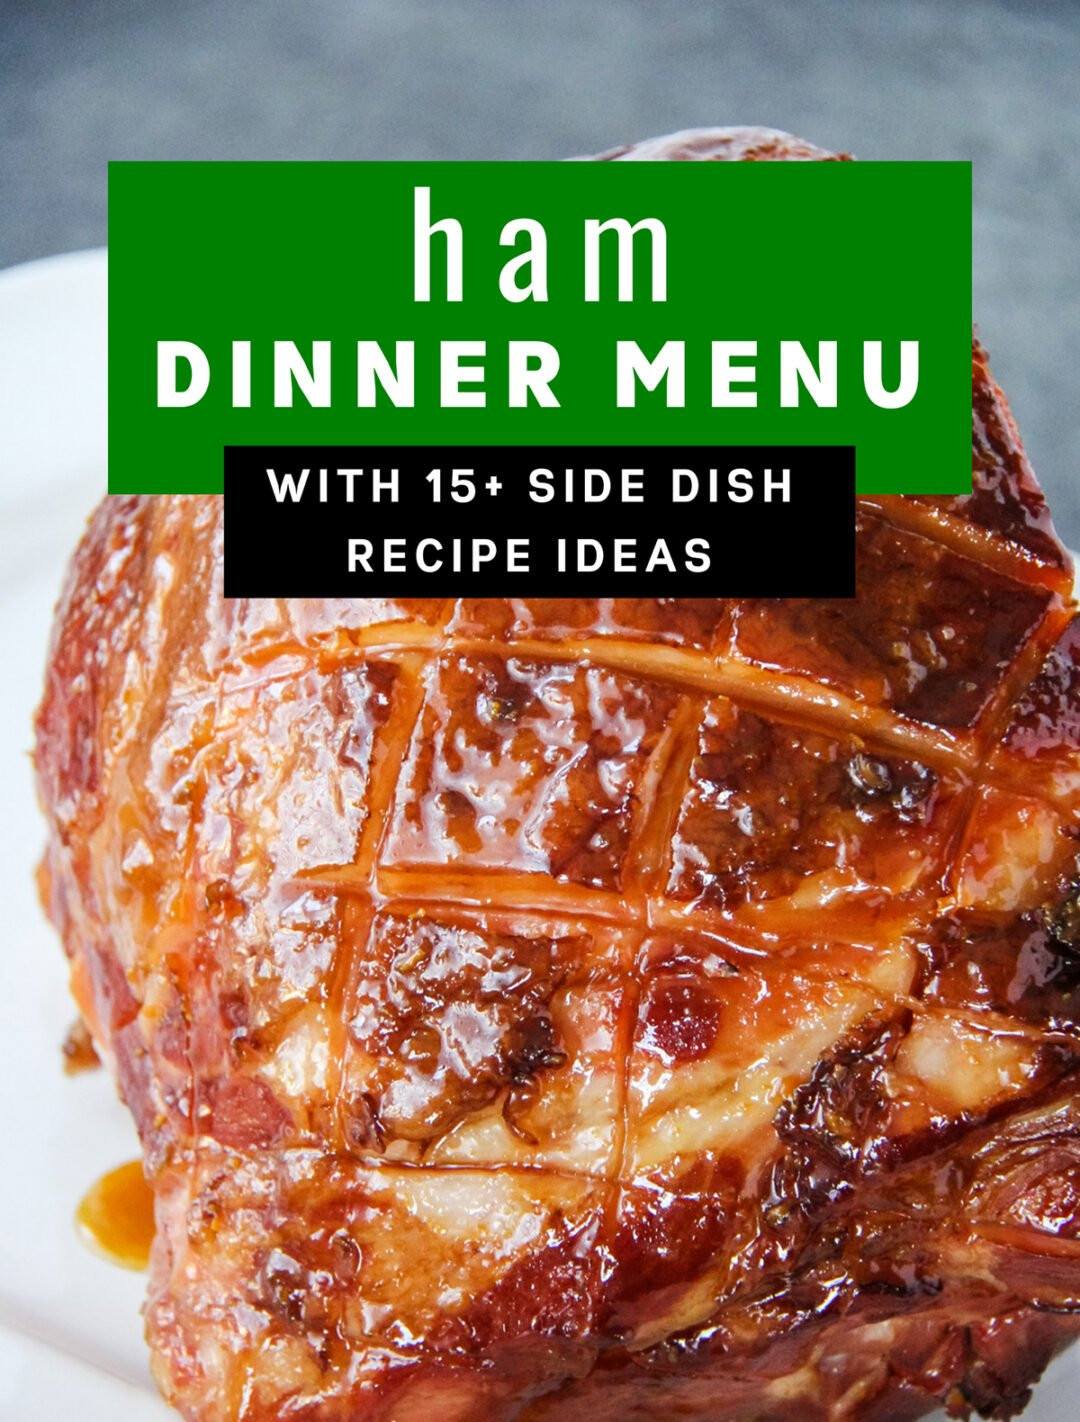 Don’t Miss Our 15 Most Shared Ham Dinner Menu